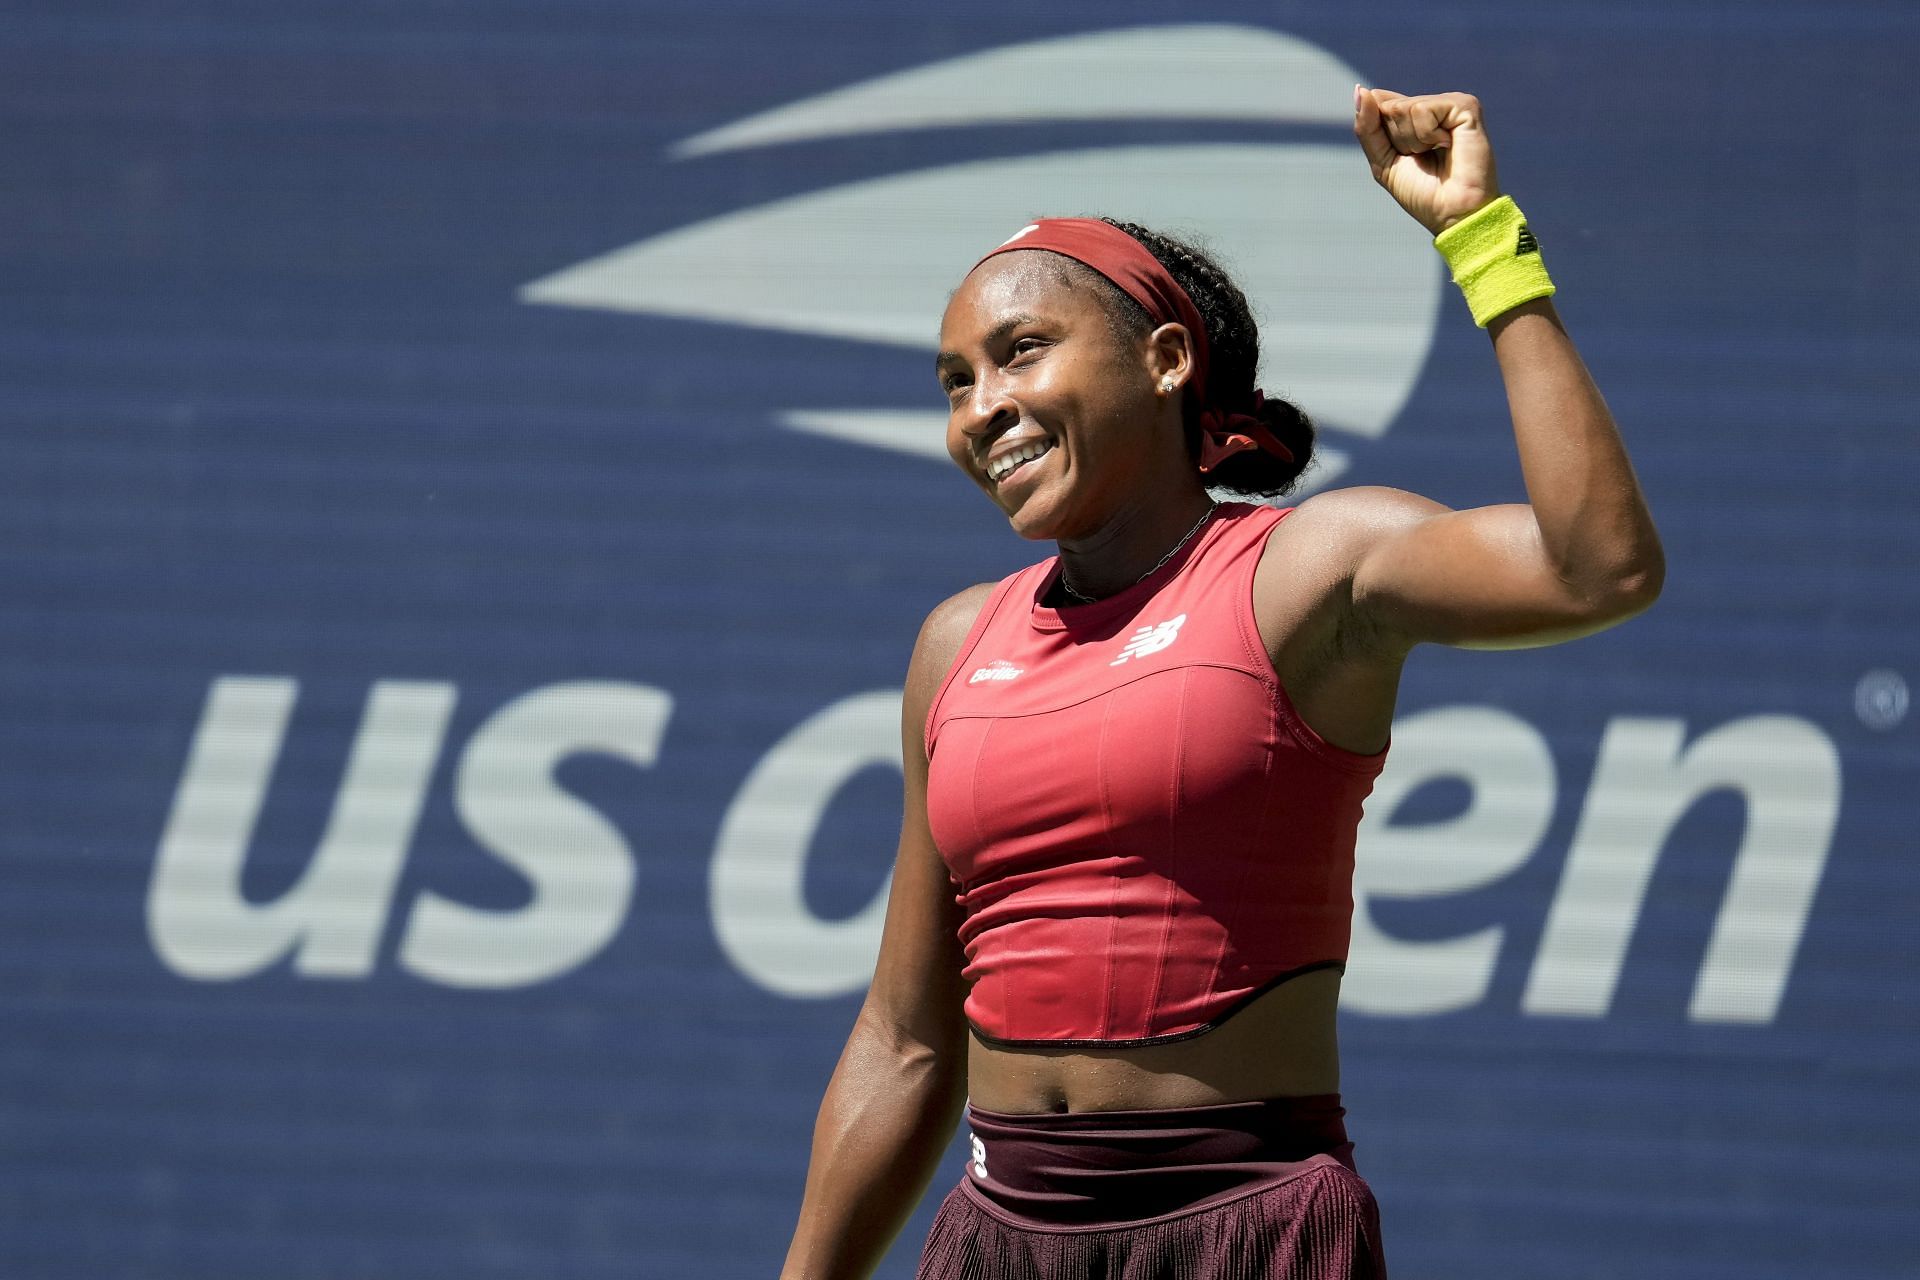 Coco Gauff's next match: Opponent, venue, live streaming, TV channel